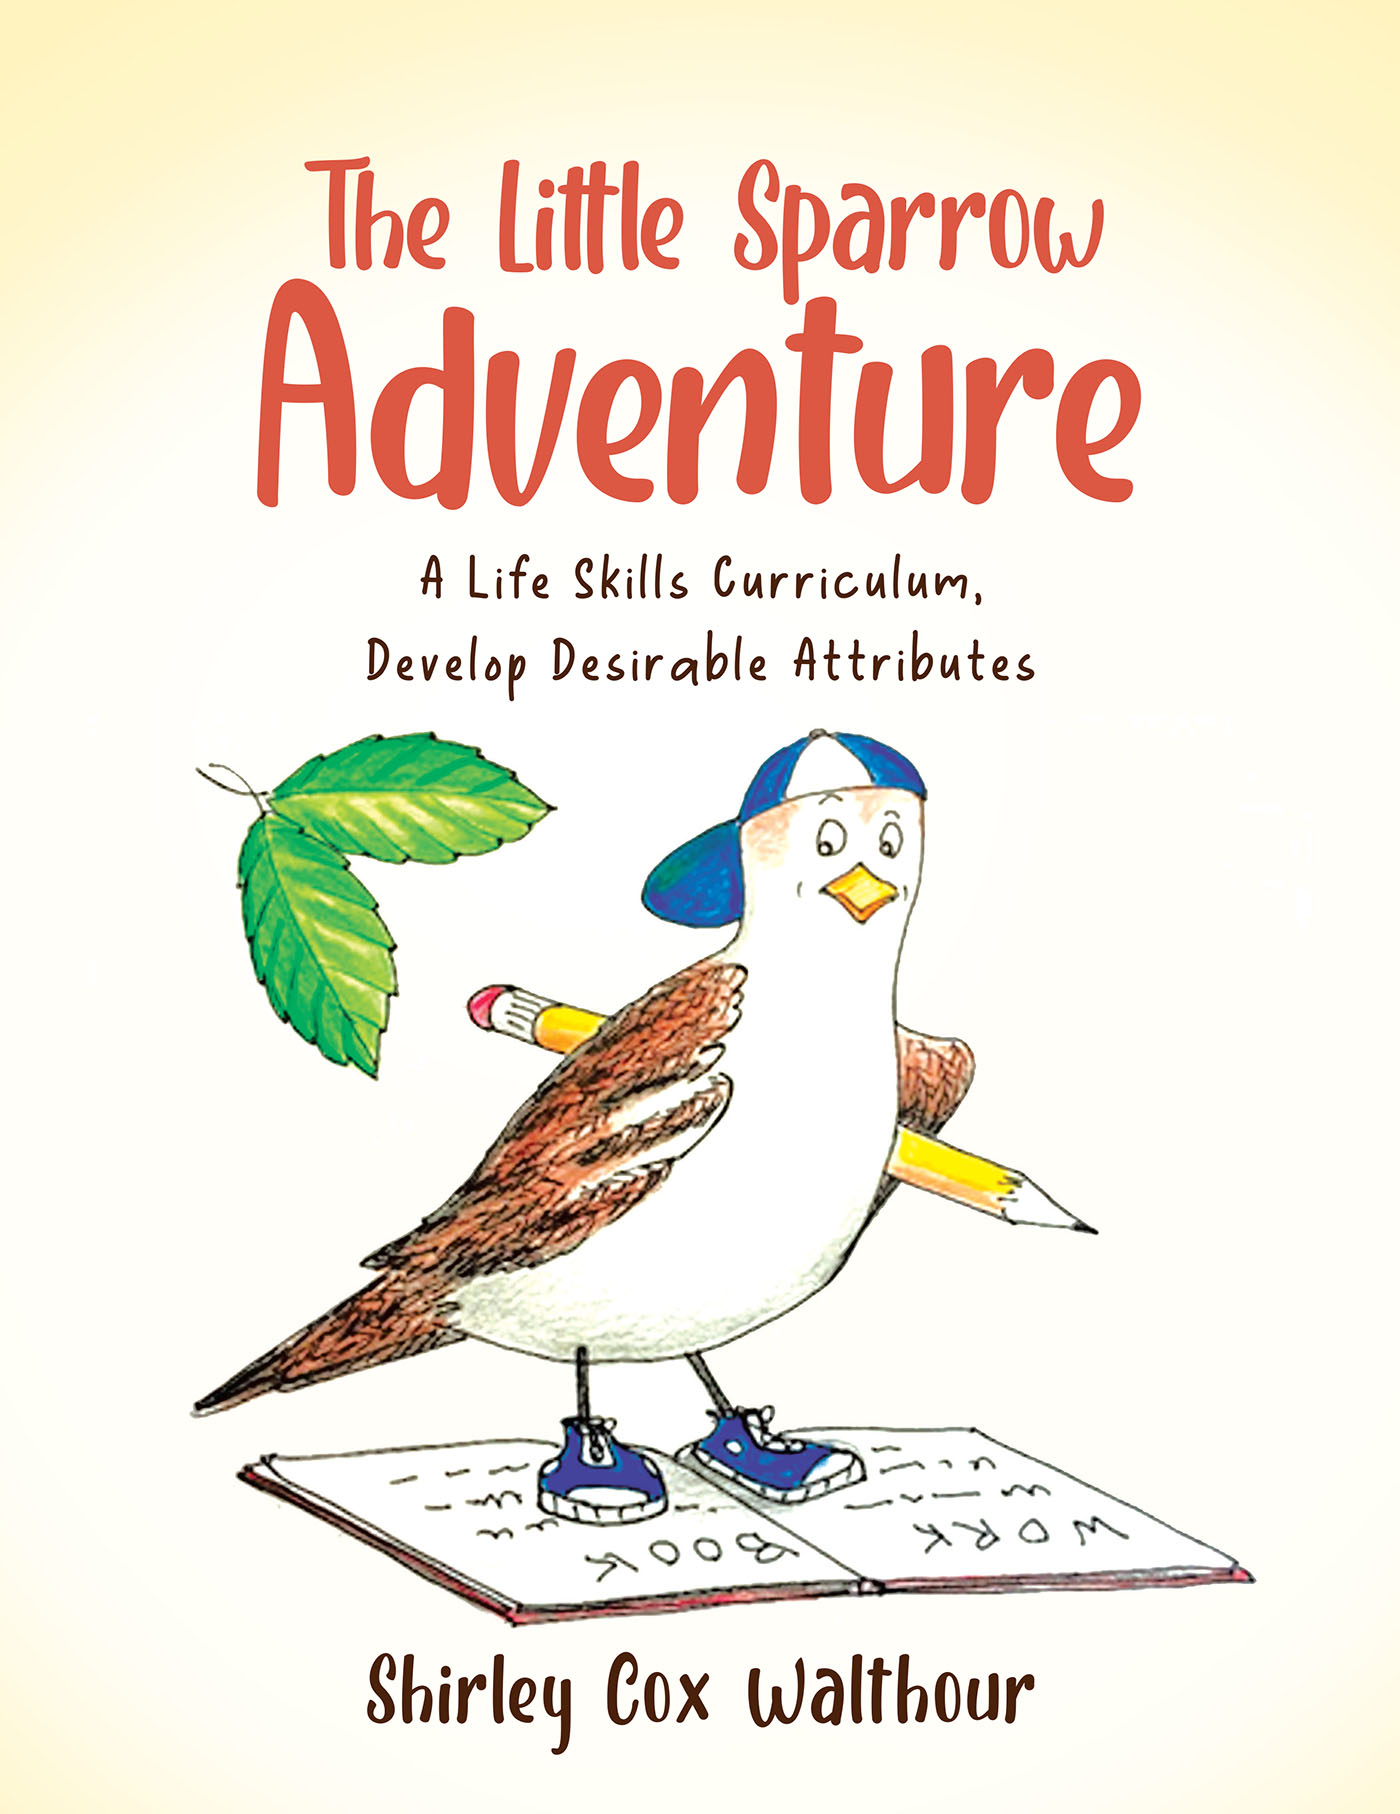 Shirley Cox Walthour’s Newly Released "The Little Sparrow Adventure" is a Helpful Resource for Programs Addressing Life Skills and Development